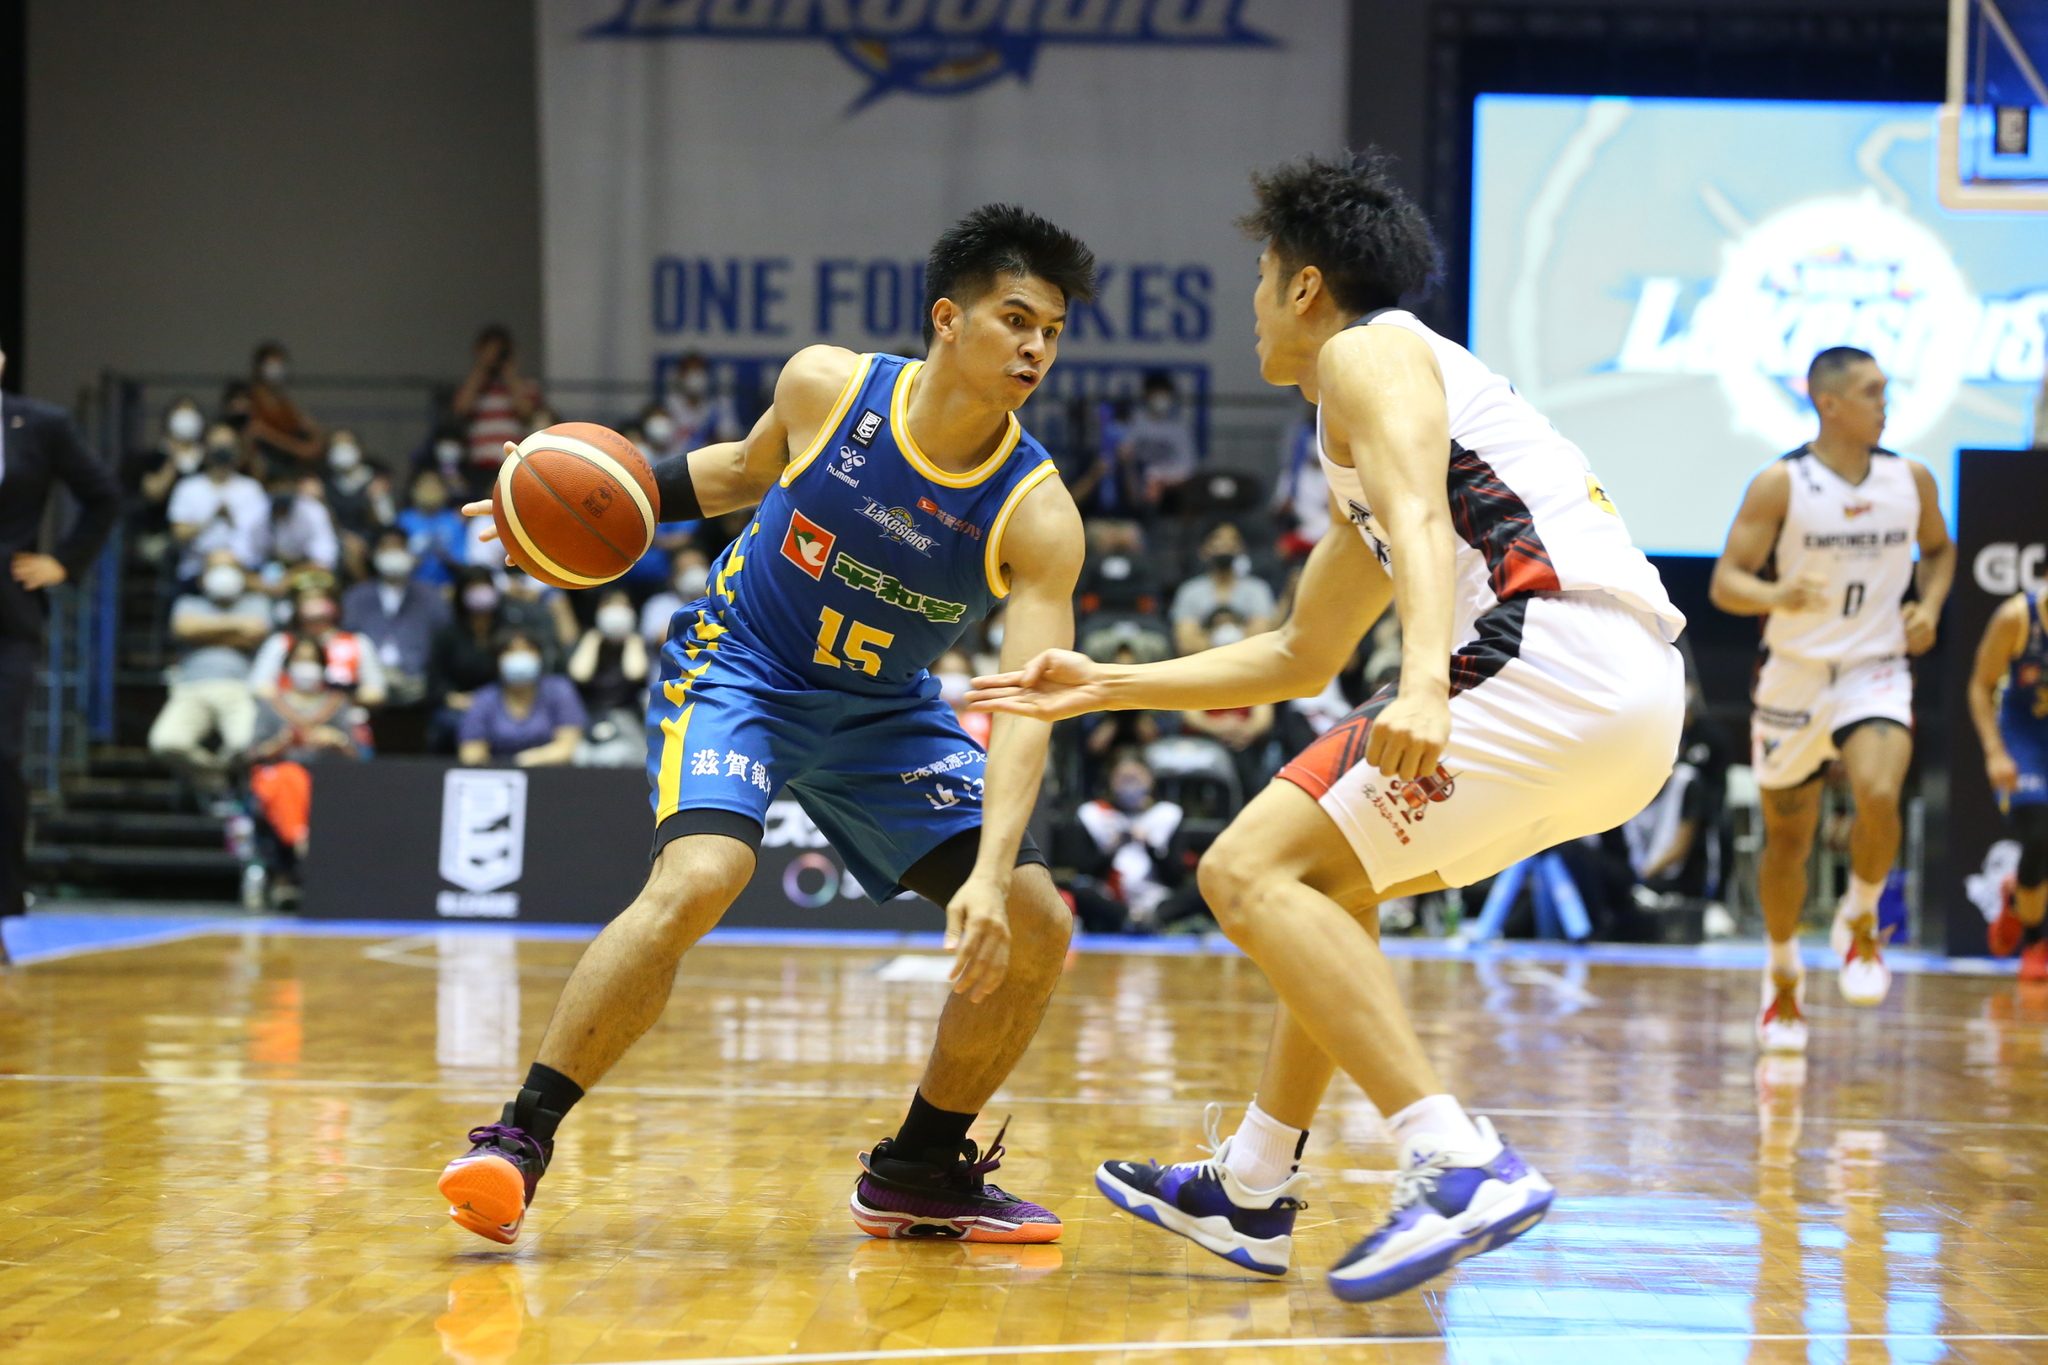 Kiefer Ravena out to ‘showcase worth’ of PBA to B. League competition